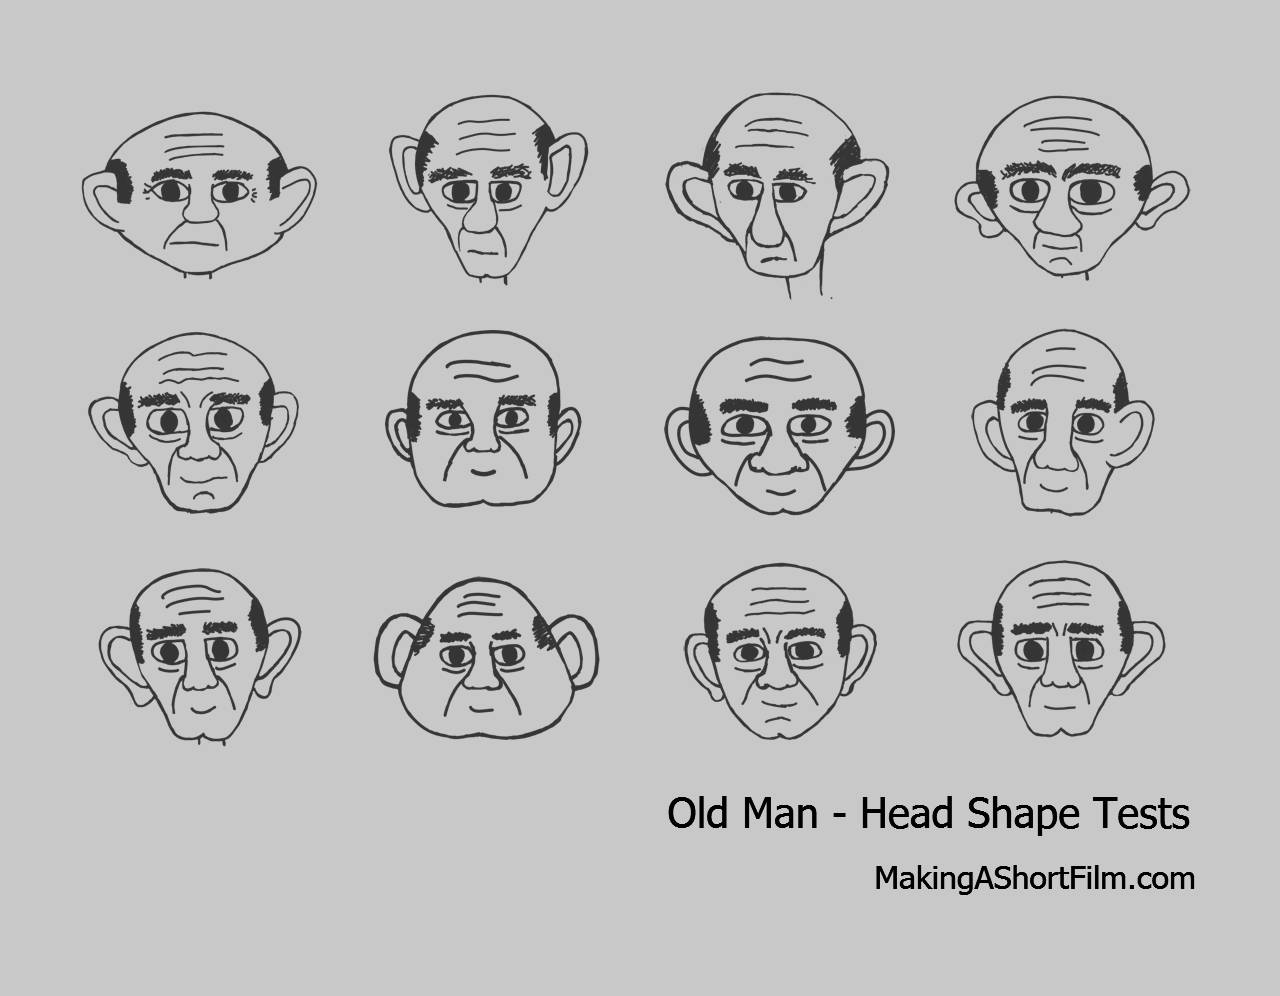 The Old Man's General Shape